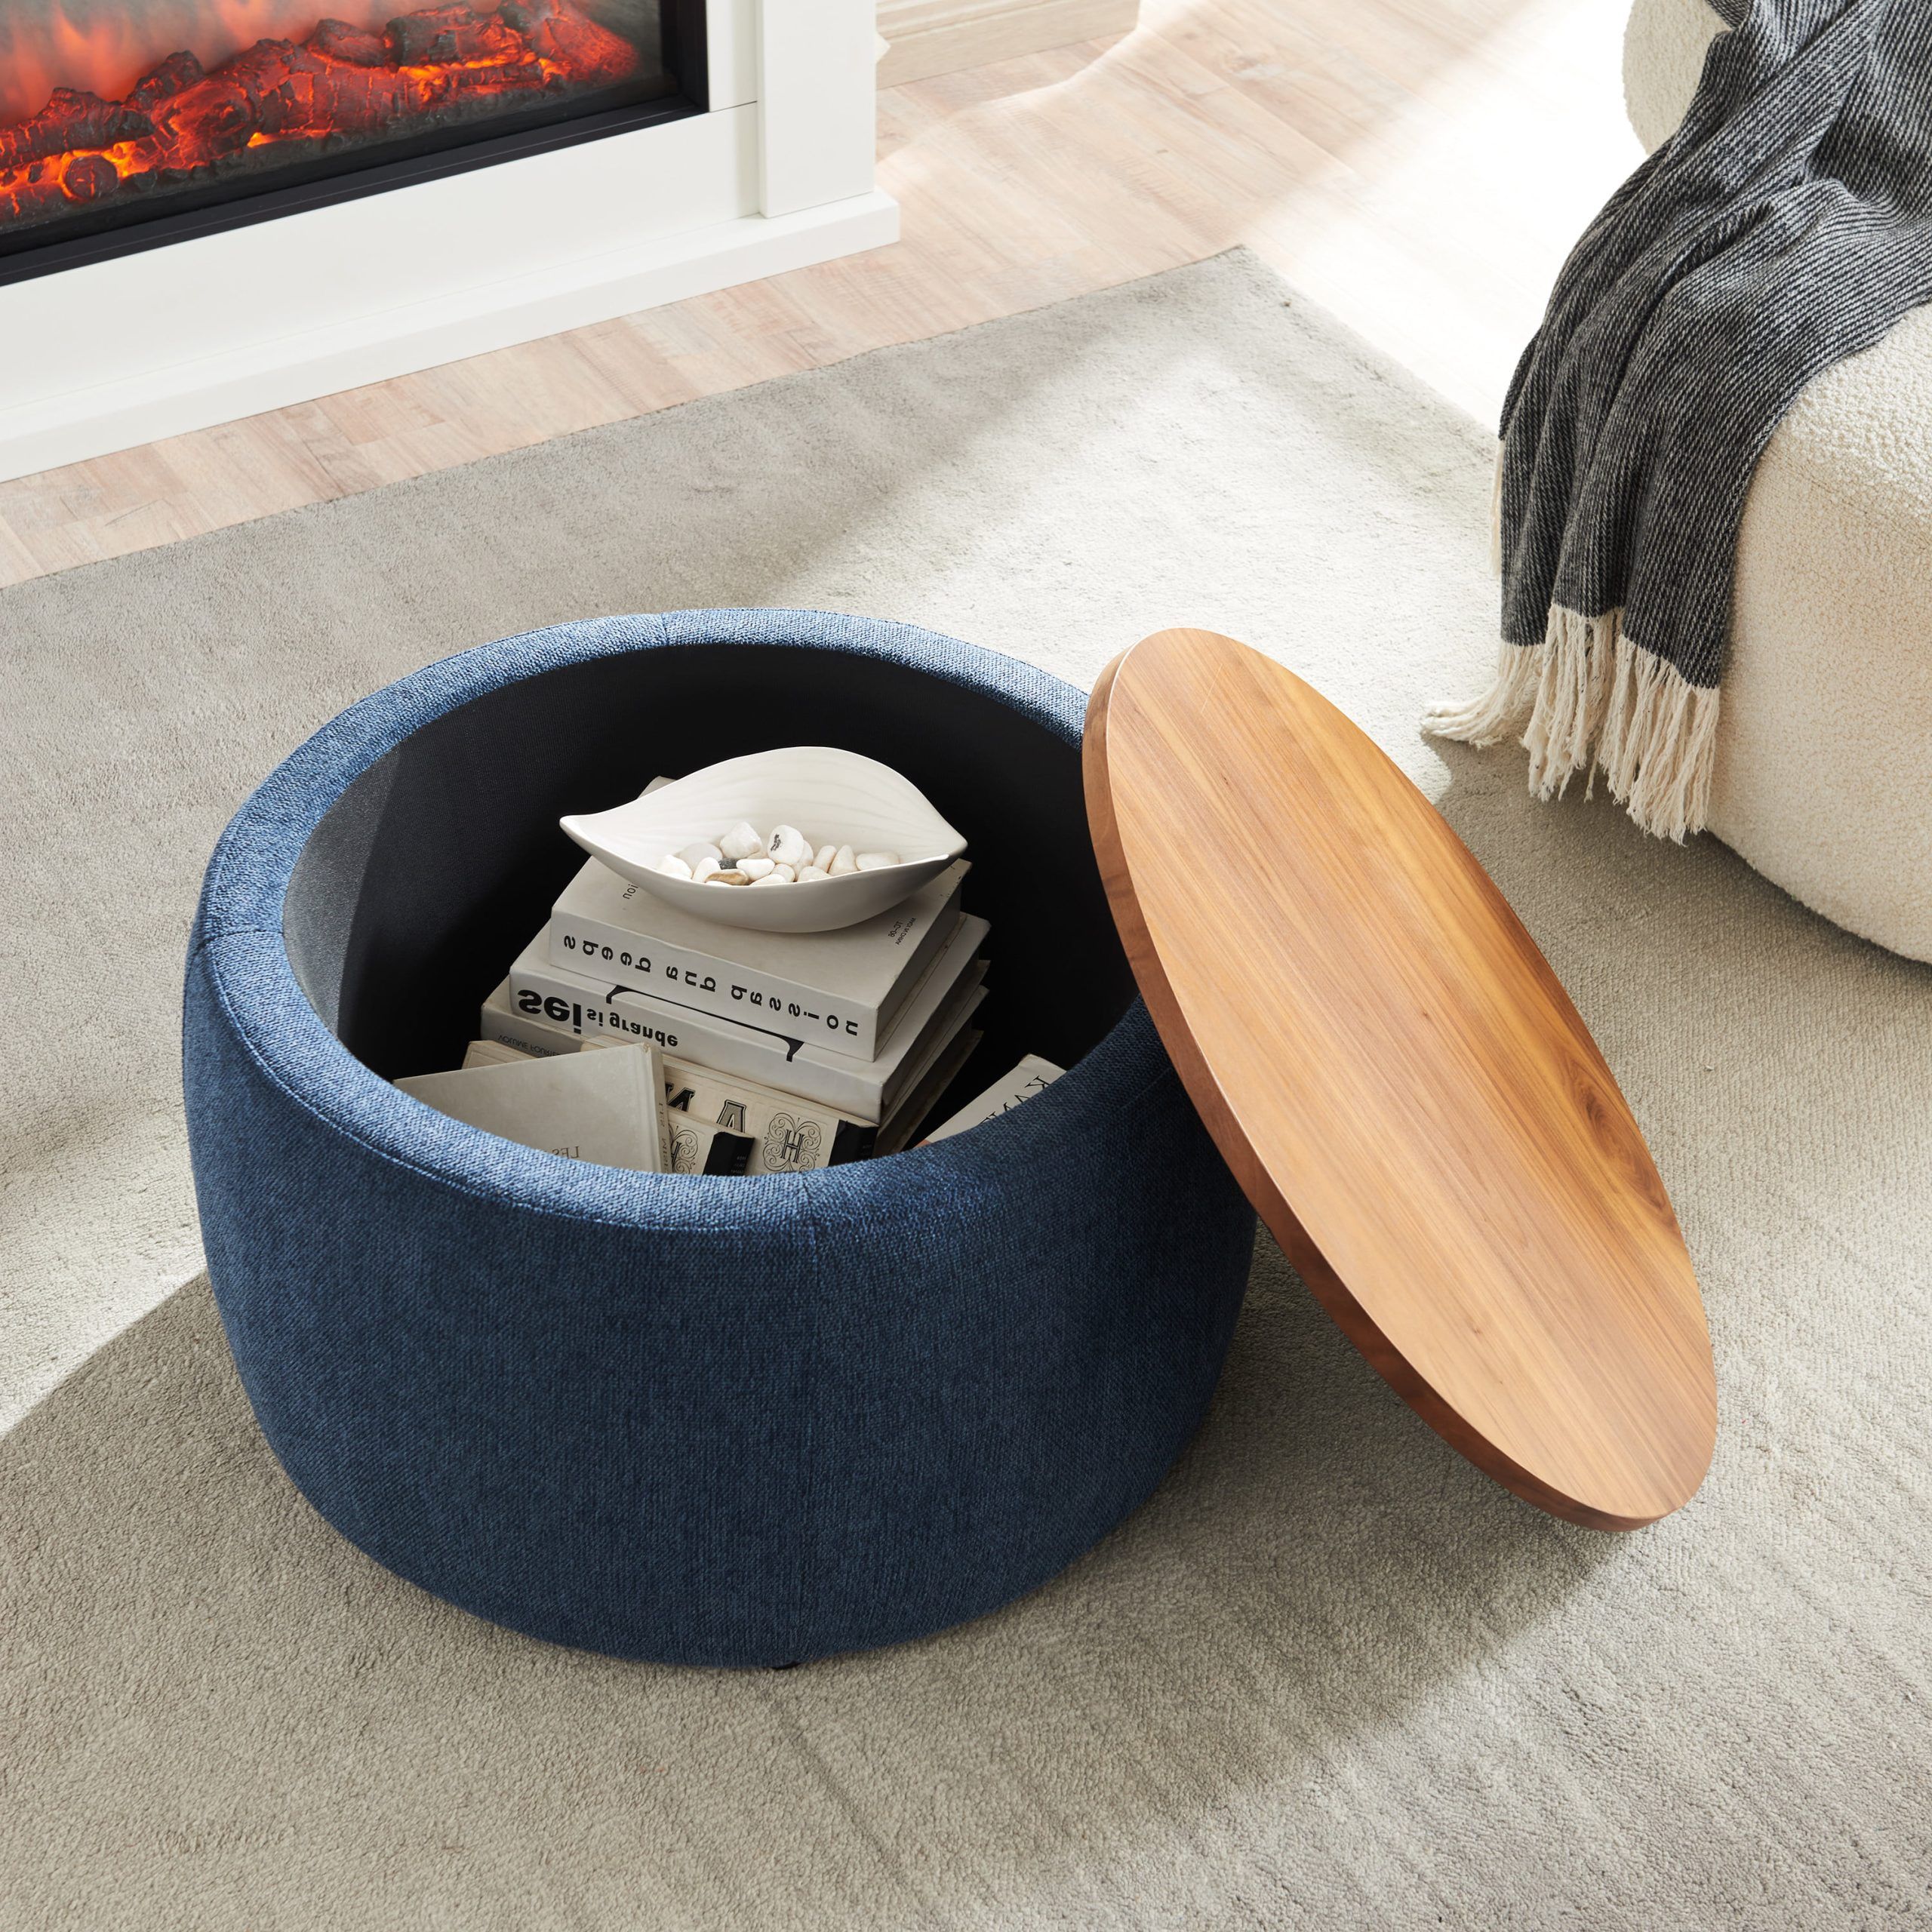 Recent Btmwayround Storage Ottoman, Upholstered Round Ottoman Footrest Stool,  Round Coffee Table With Storage, Reversible Lid Tray, Ottoman With Storage  For Bedroom Living Room Office Home, Navy Blue – Walmart Intended For Ottomans With Stool And Reversible Tray (View 11 of 15)